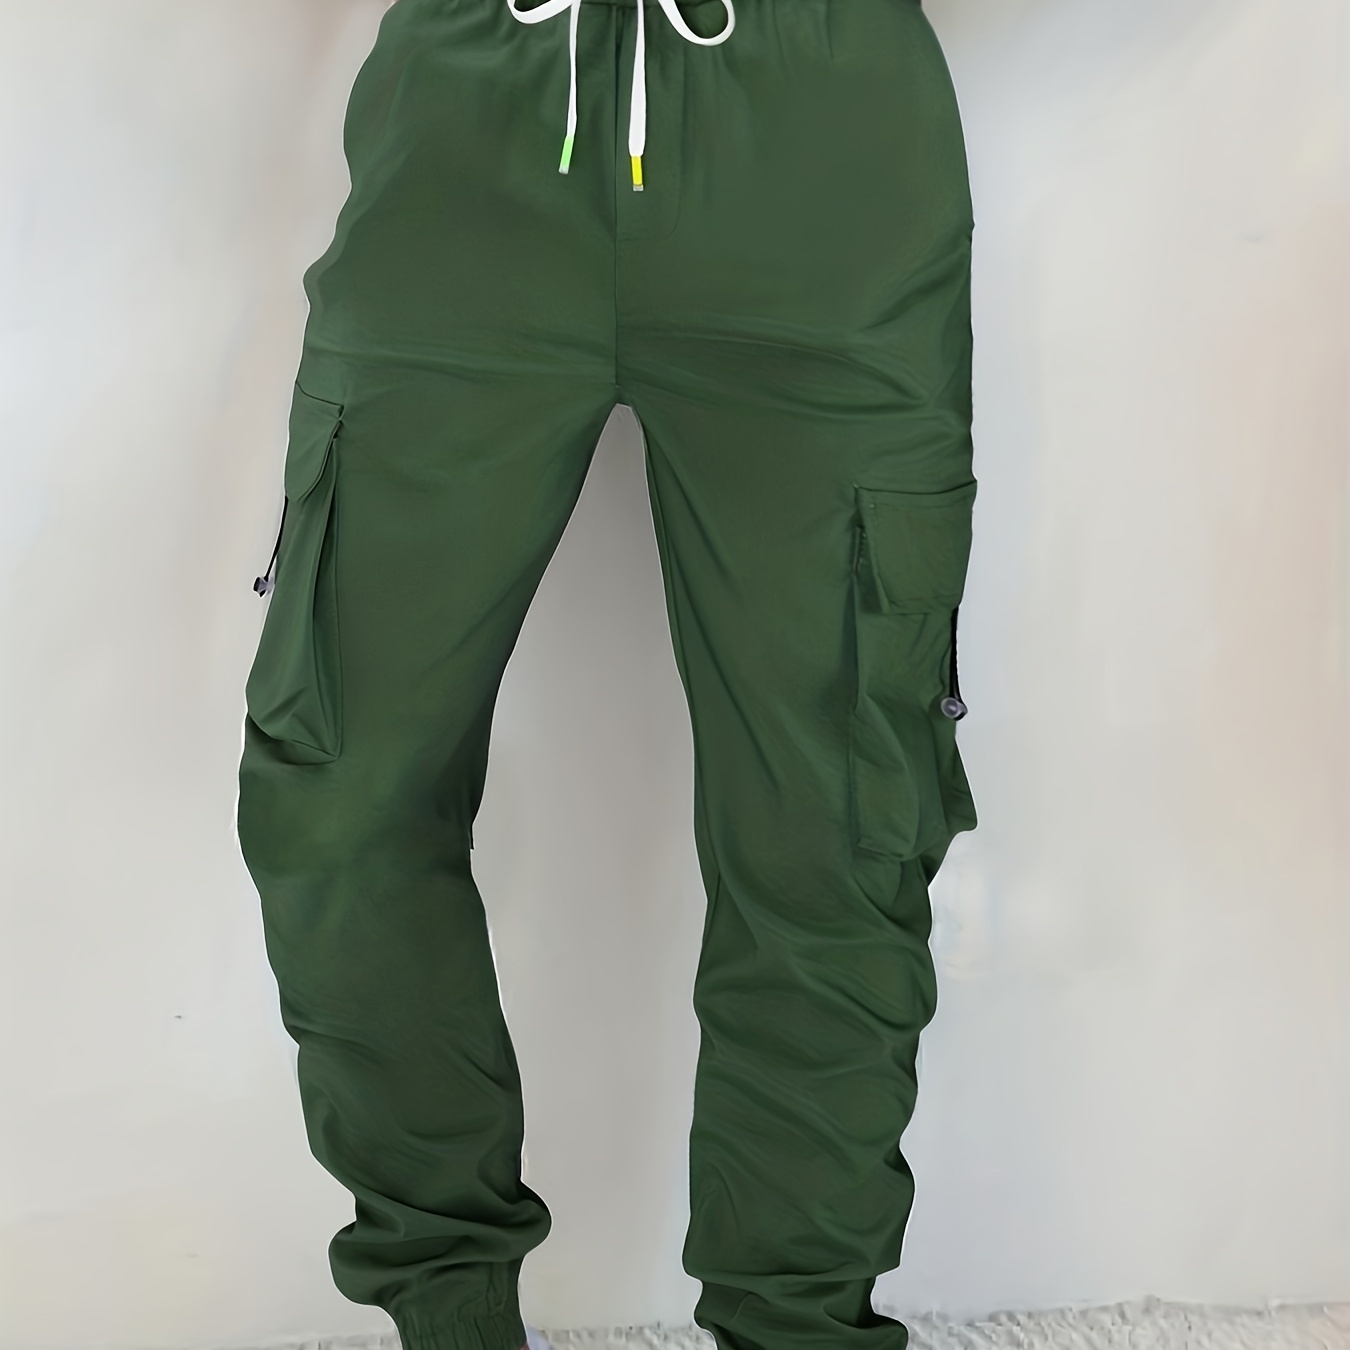 

Women's Casual Cargo Pants, Fashionable Loose-fit With Pockets, Elastic Waist With Drawstring, Streetwear Style